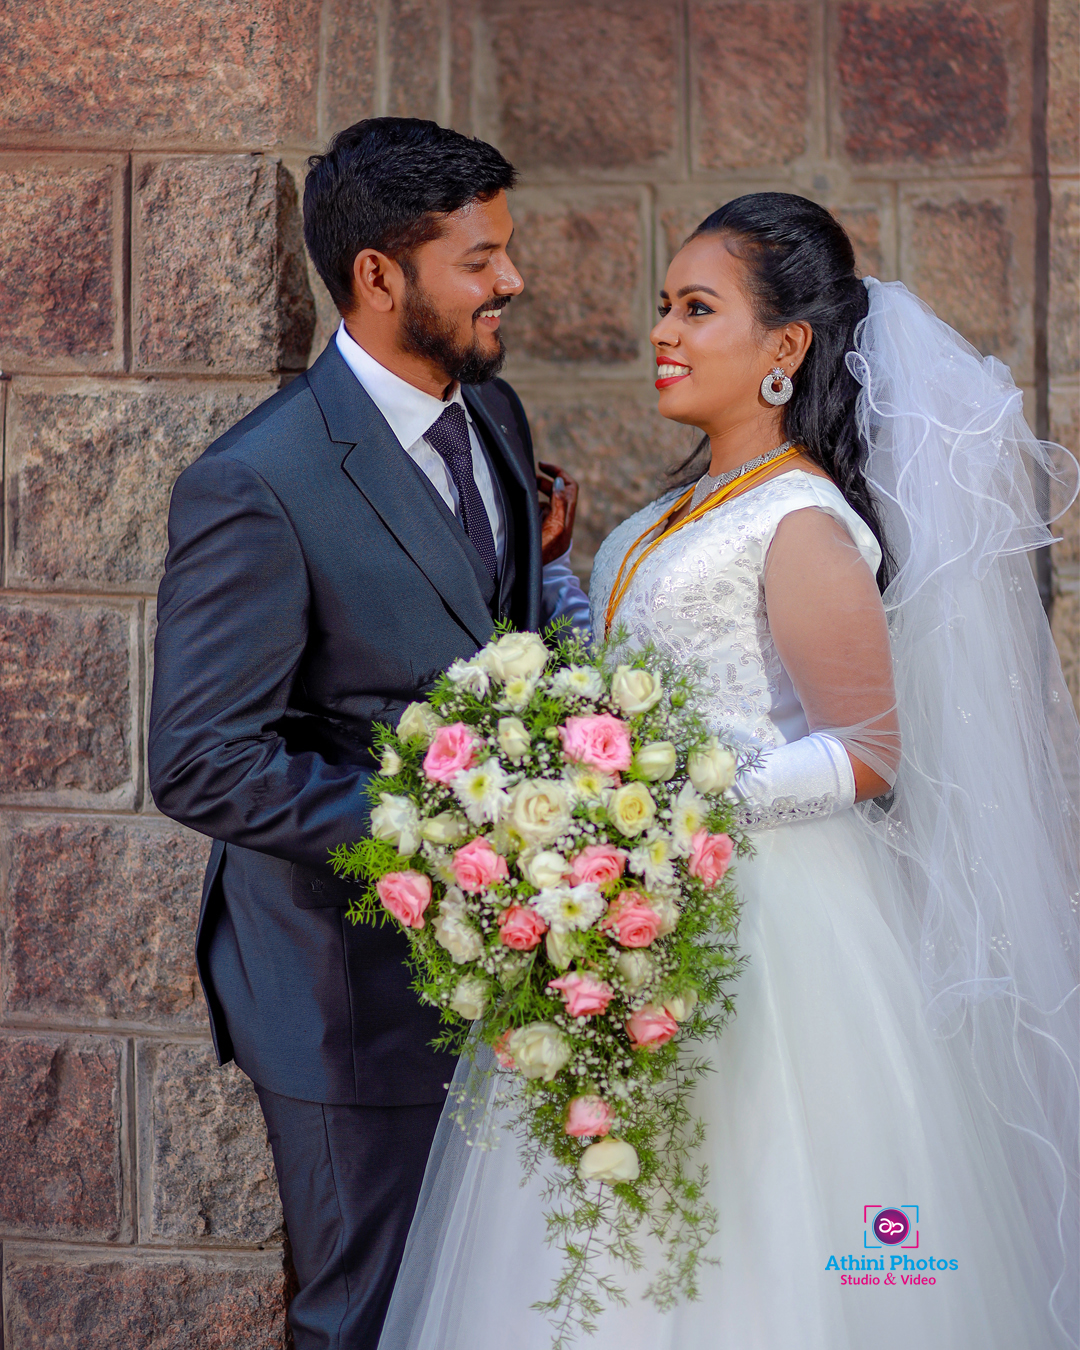 Best Christian Wedding Photographers In Madurai | Jaihind Photography | Pre  wedding photoshoot outdoor, Wedding photoshoot props, Wedding couple poses  photography